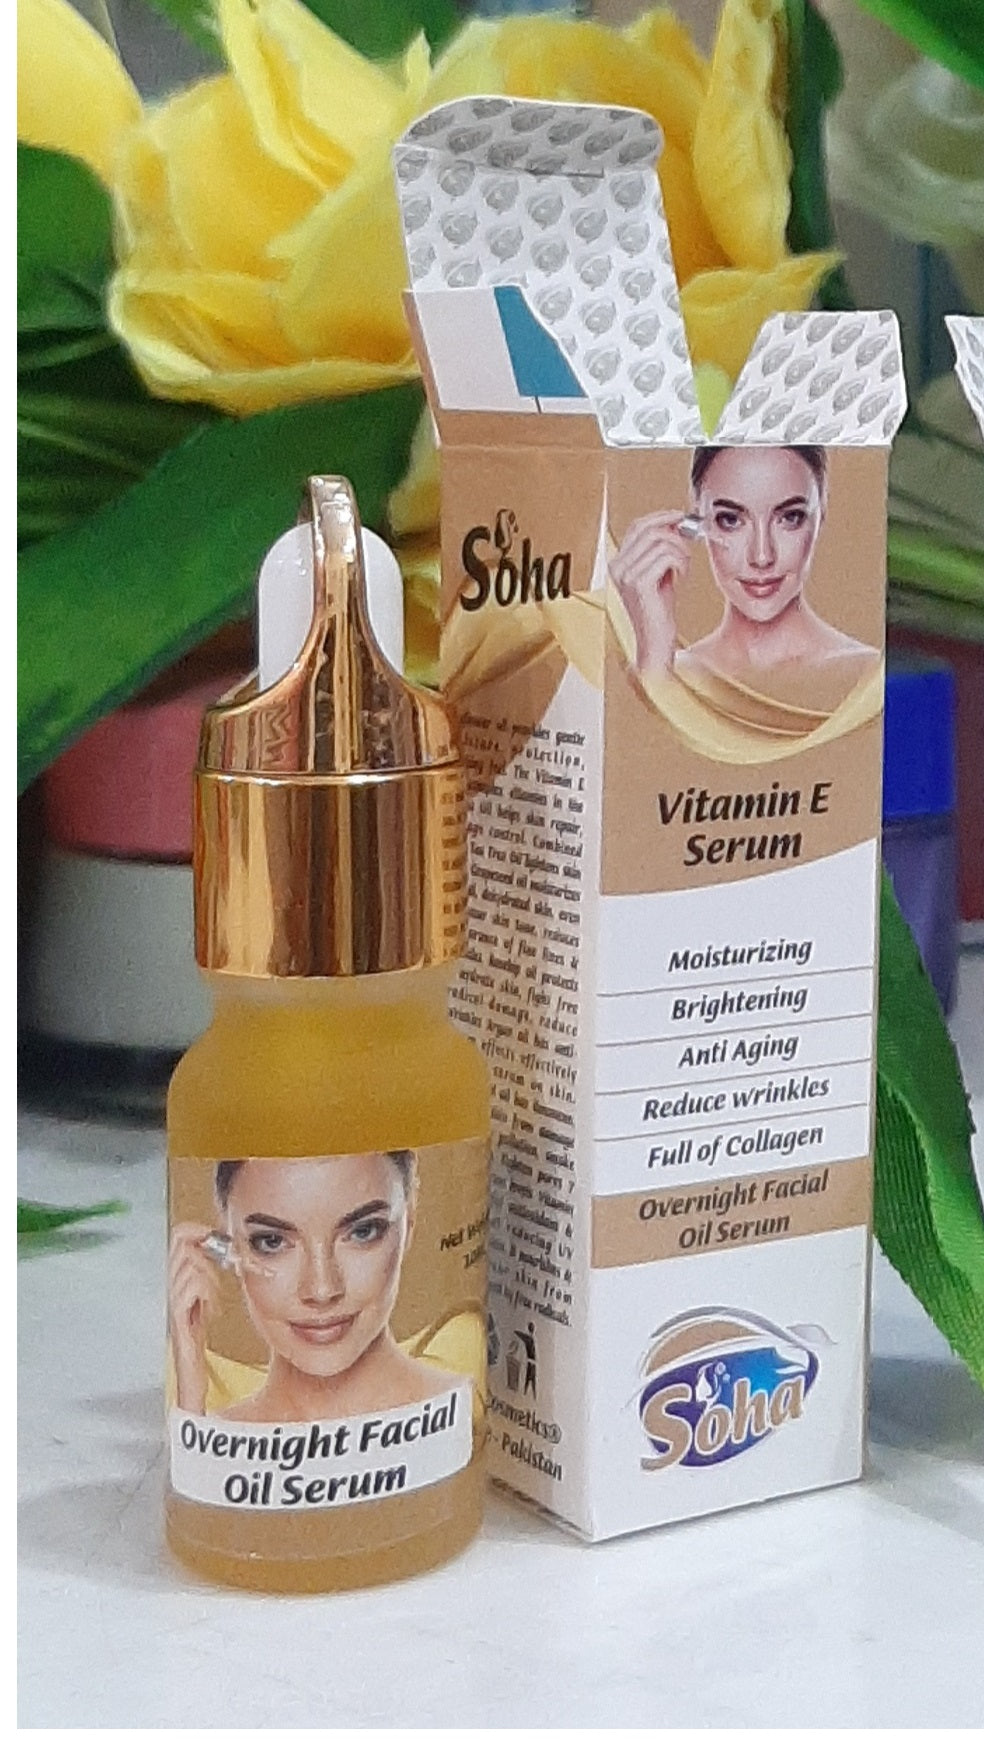 Is there any side effects of vitamin E serum?